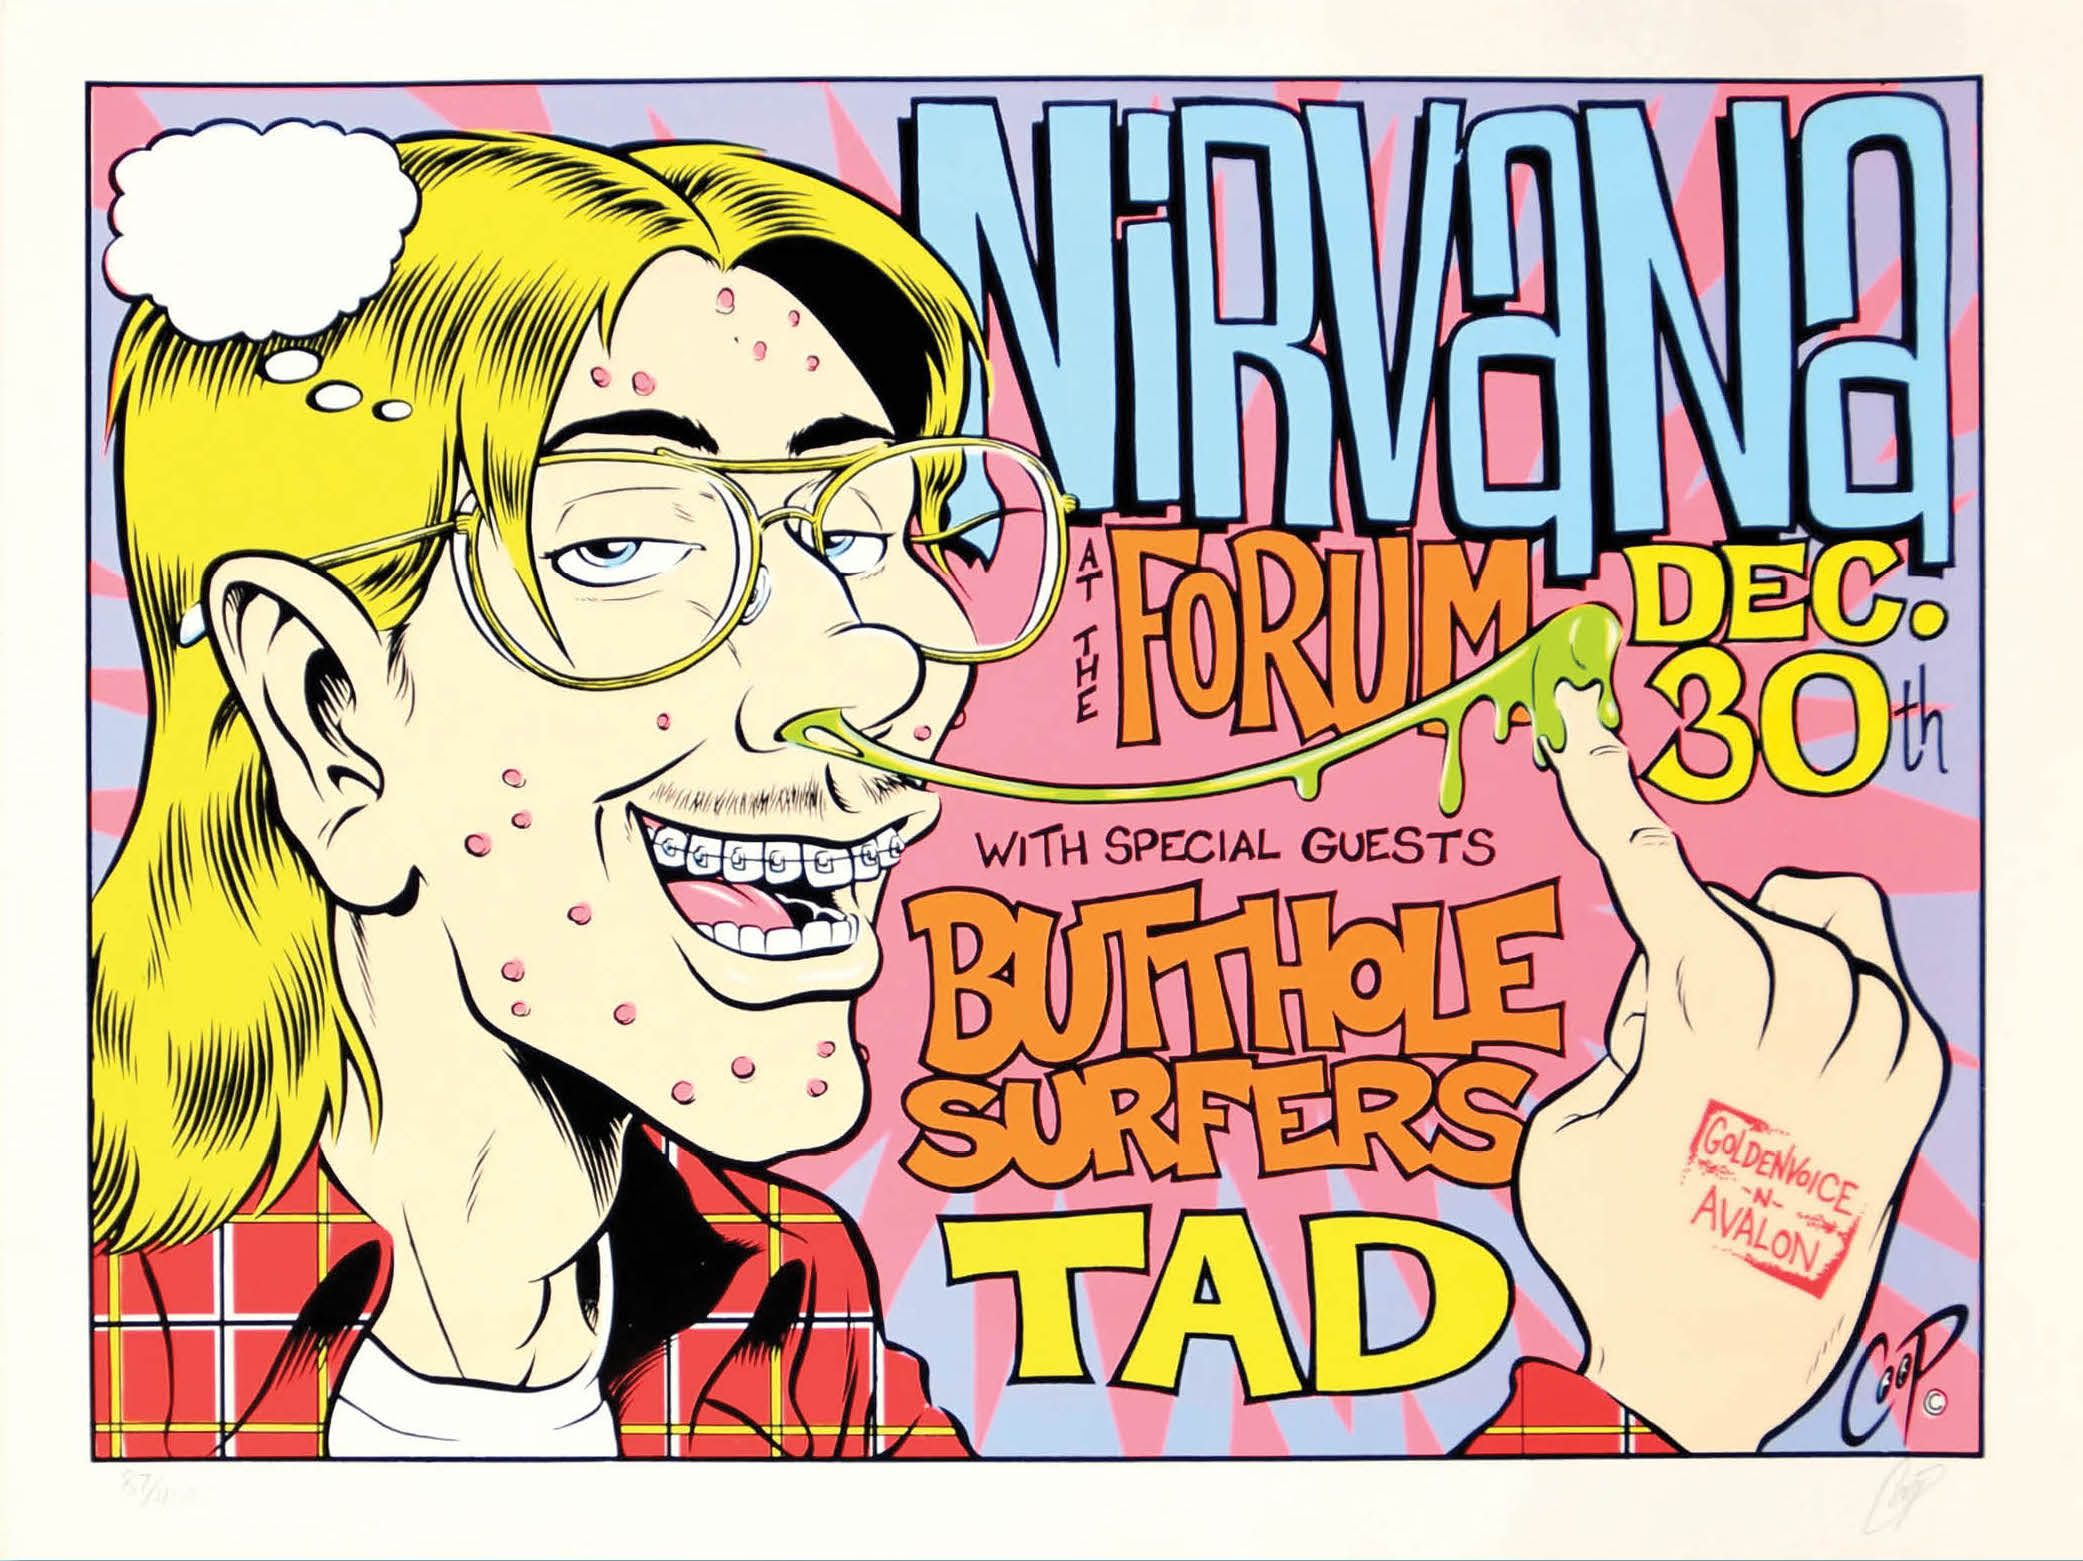 Nirvana & Butthole Surfers The Forum 1993 Concert Poster